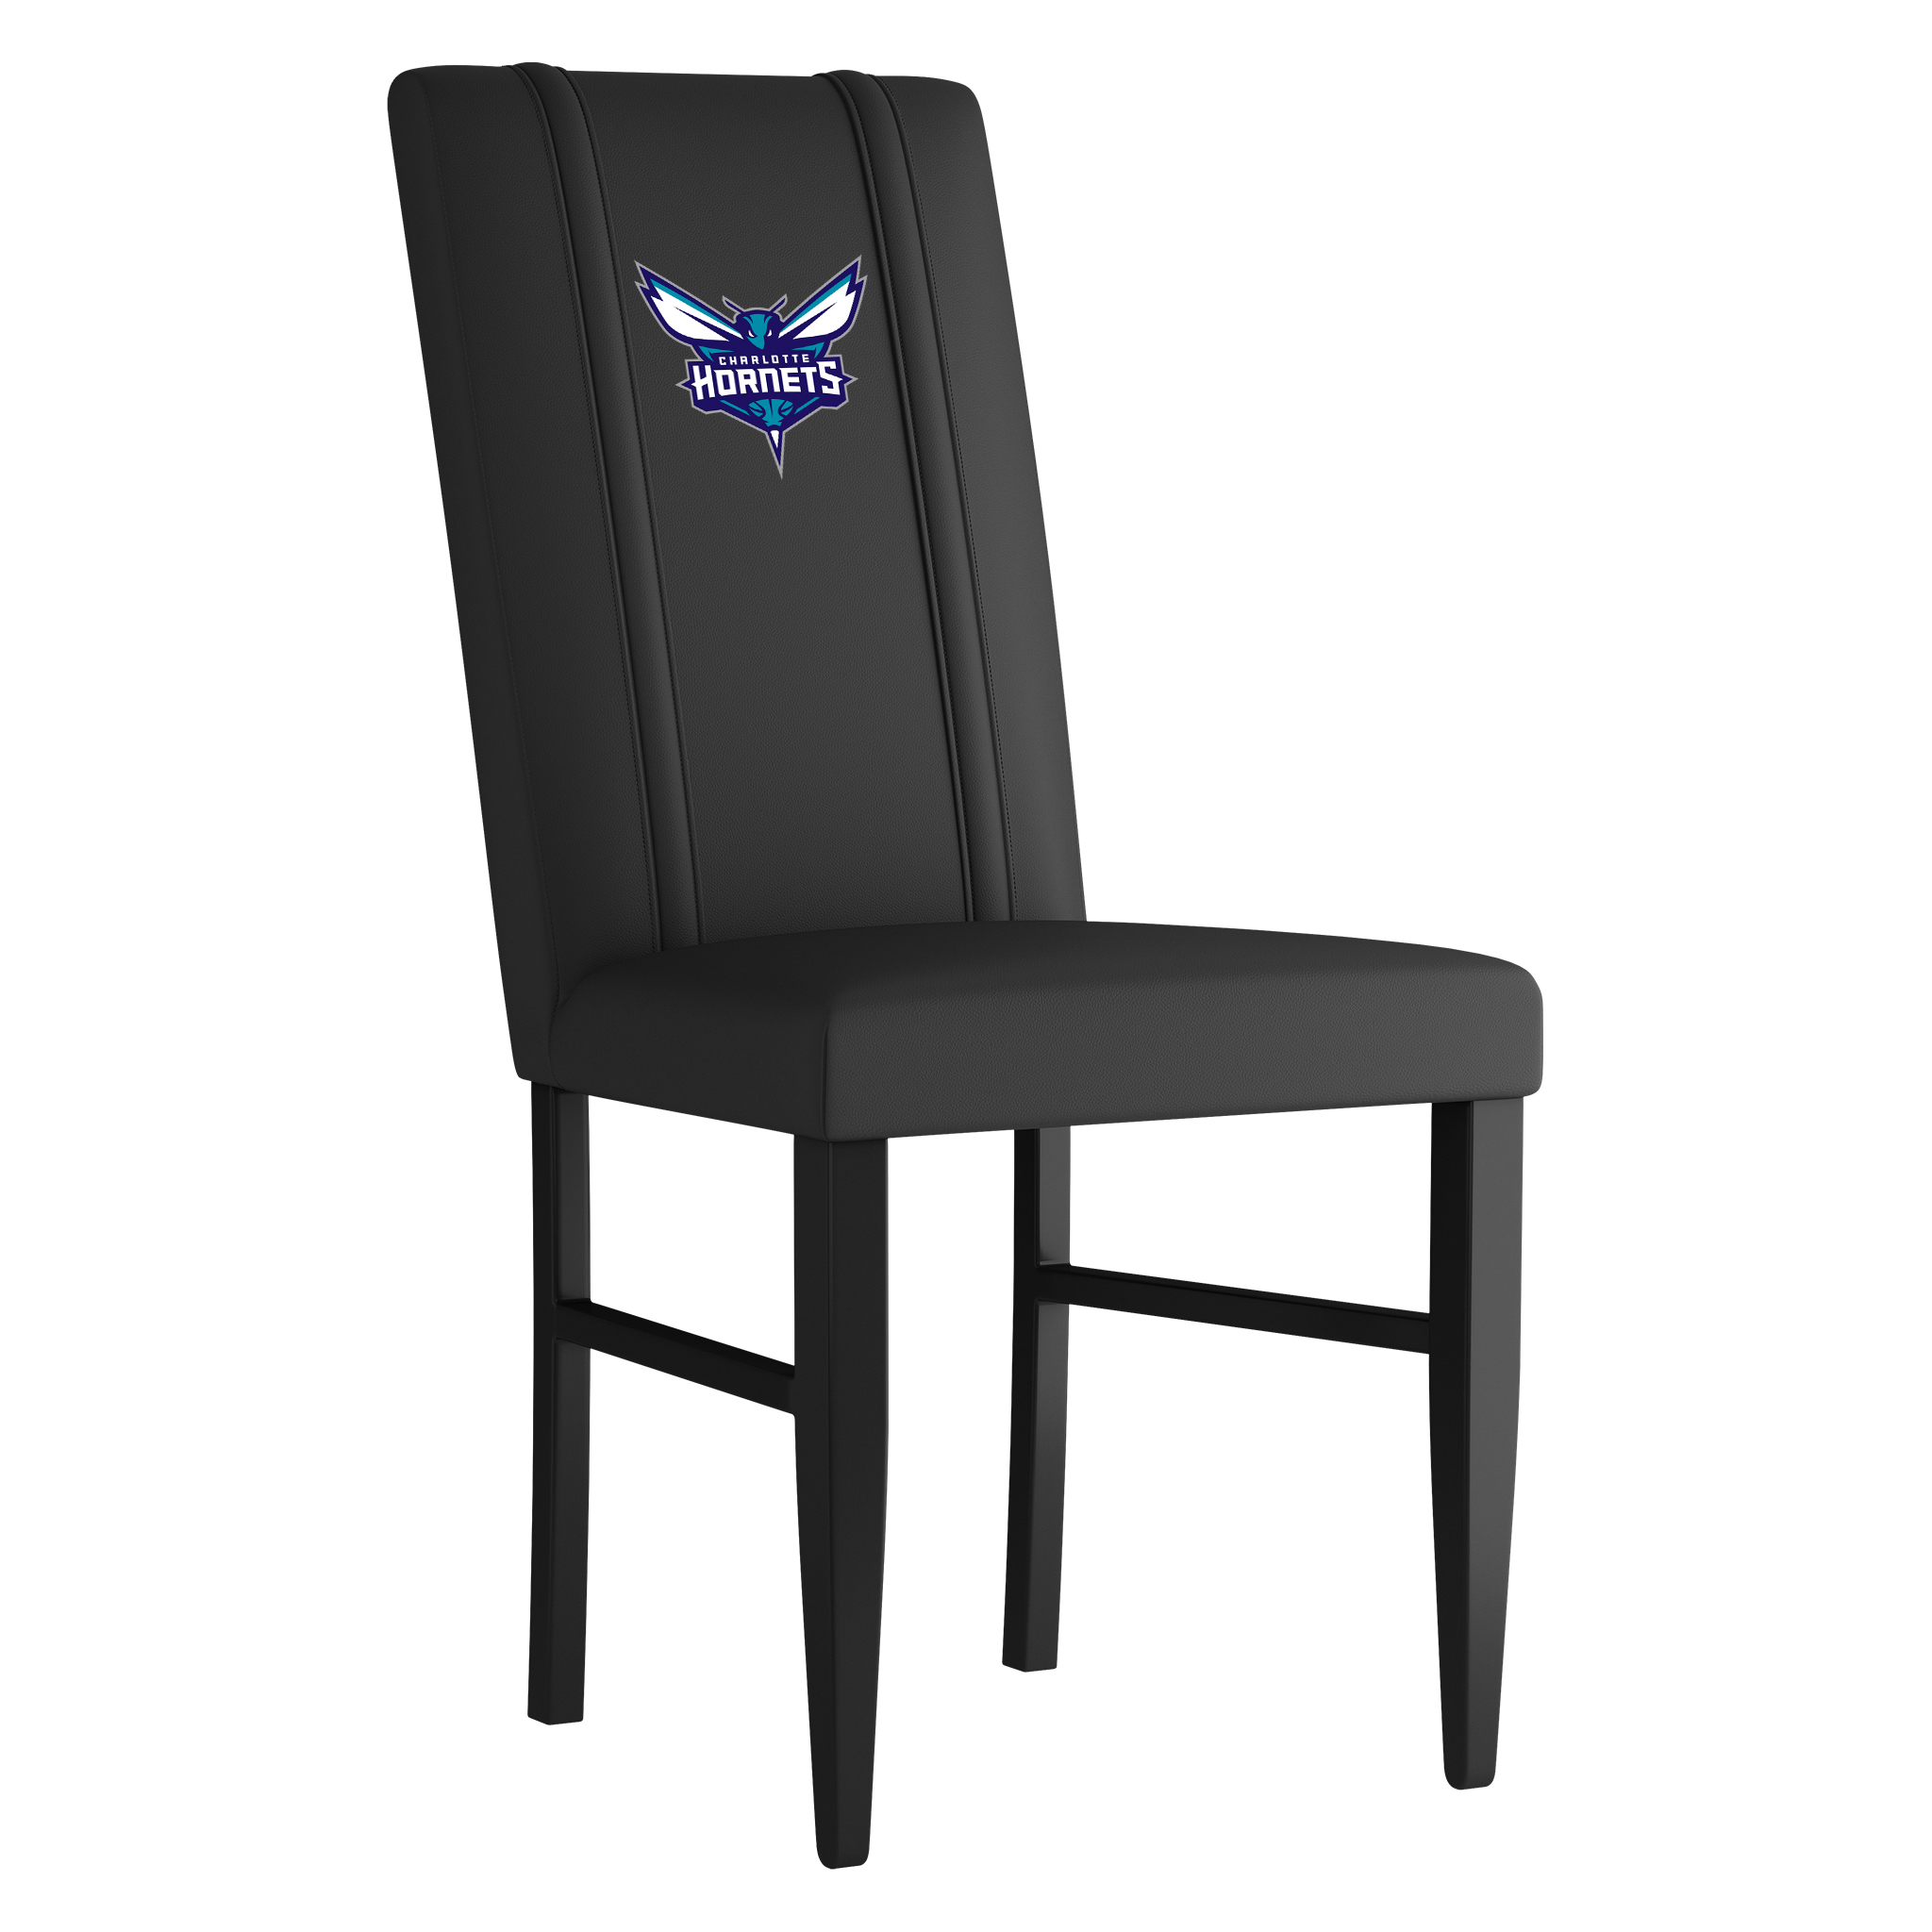 Charlotte Hornets Side Chair 2000 With Charlotte Hornets Primary